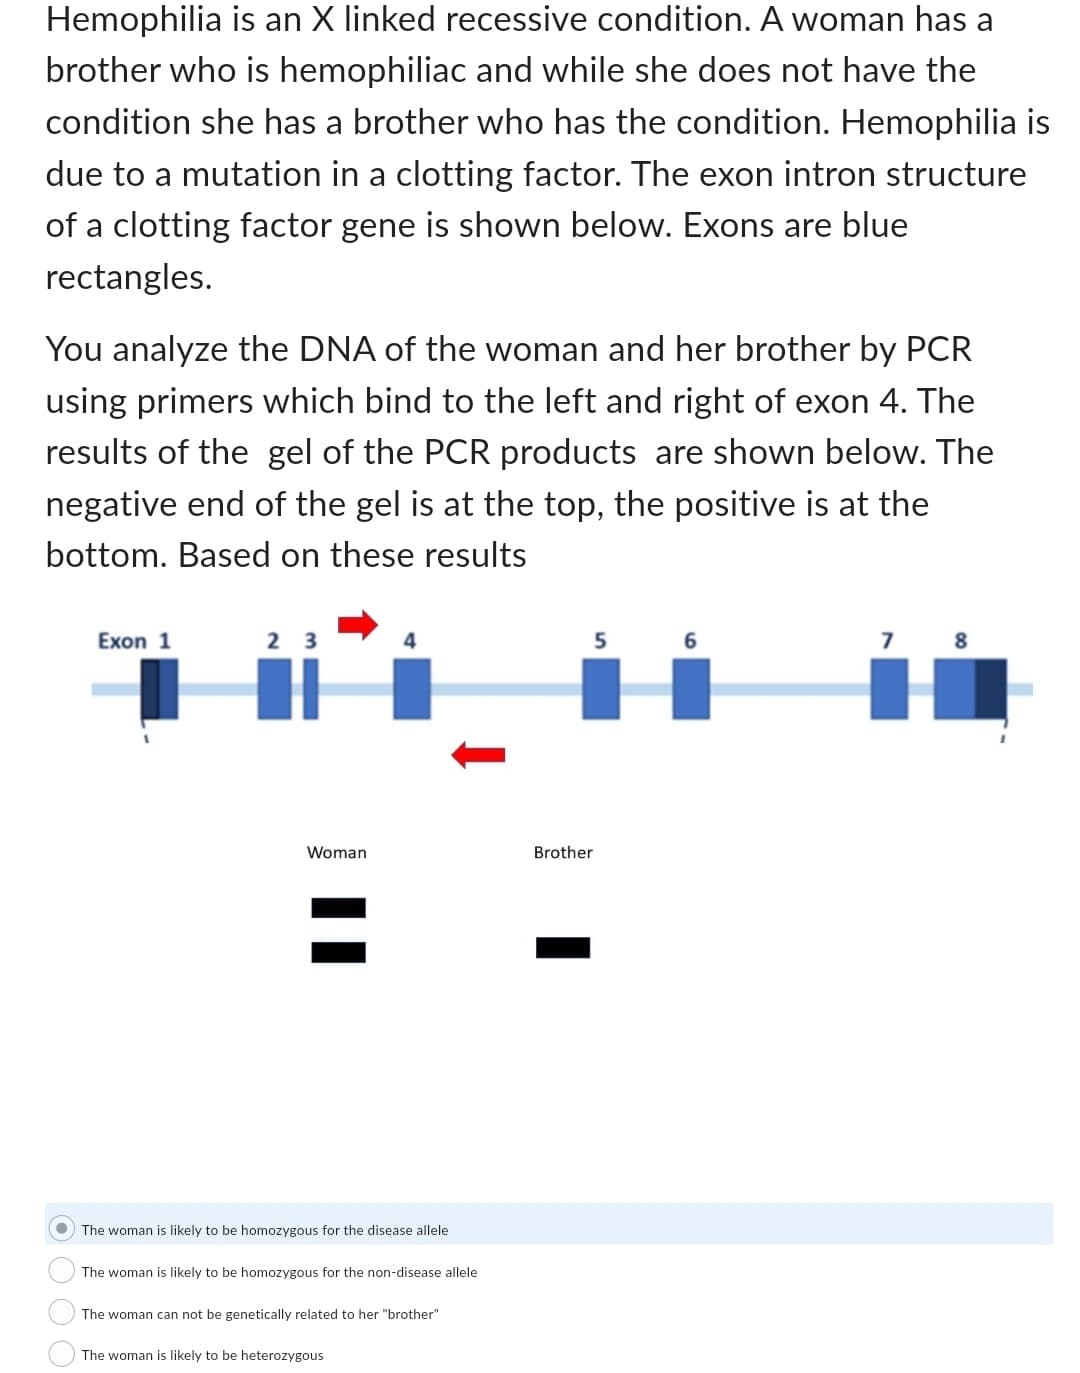 Hemophilia is an X linked recessive condition. A woman has a
brother who is hemophiliac and while she does not have the
condition she has a brother who has the condition. Hemophilia is
due to a mutation in a clotting factor. The exon intron structure
of a clotting factor gene is shown below. Exons are blue
rectangles.
You analyze the DNA of the woman and her brother by PCR
using primers which bind to the left and right of exon 4. The
results of the gel of the PCR products are shown below. The
negative end of the gel is at the top, the positive is at the
bottom. Based on these results
Exon 1
2 3
Woman
● The woman is likely to be homozygous for the disease allele
The woman is likely to be homozygous for the non-disease allele
The woman can not be genetically related to her "brother"
The woman is likely to be heterozygous
5
Brother
6
7 8